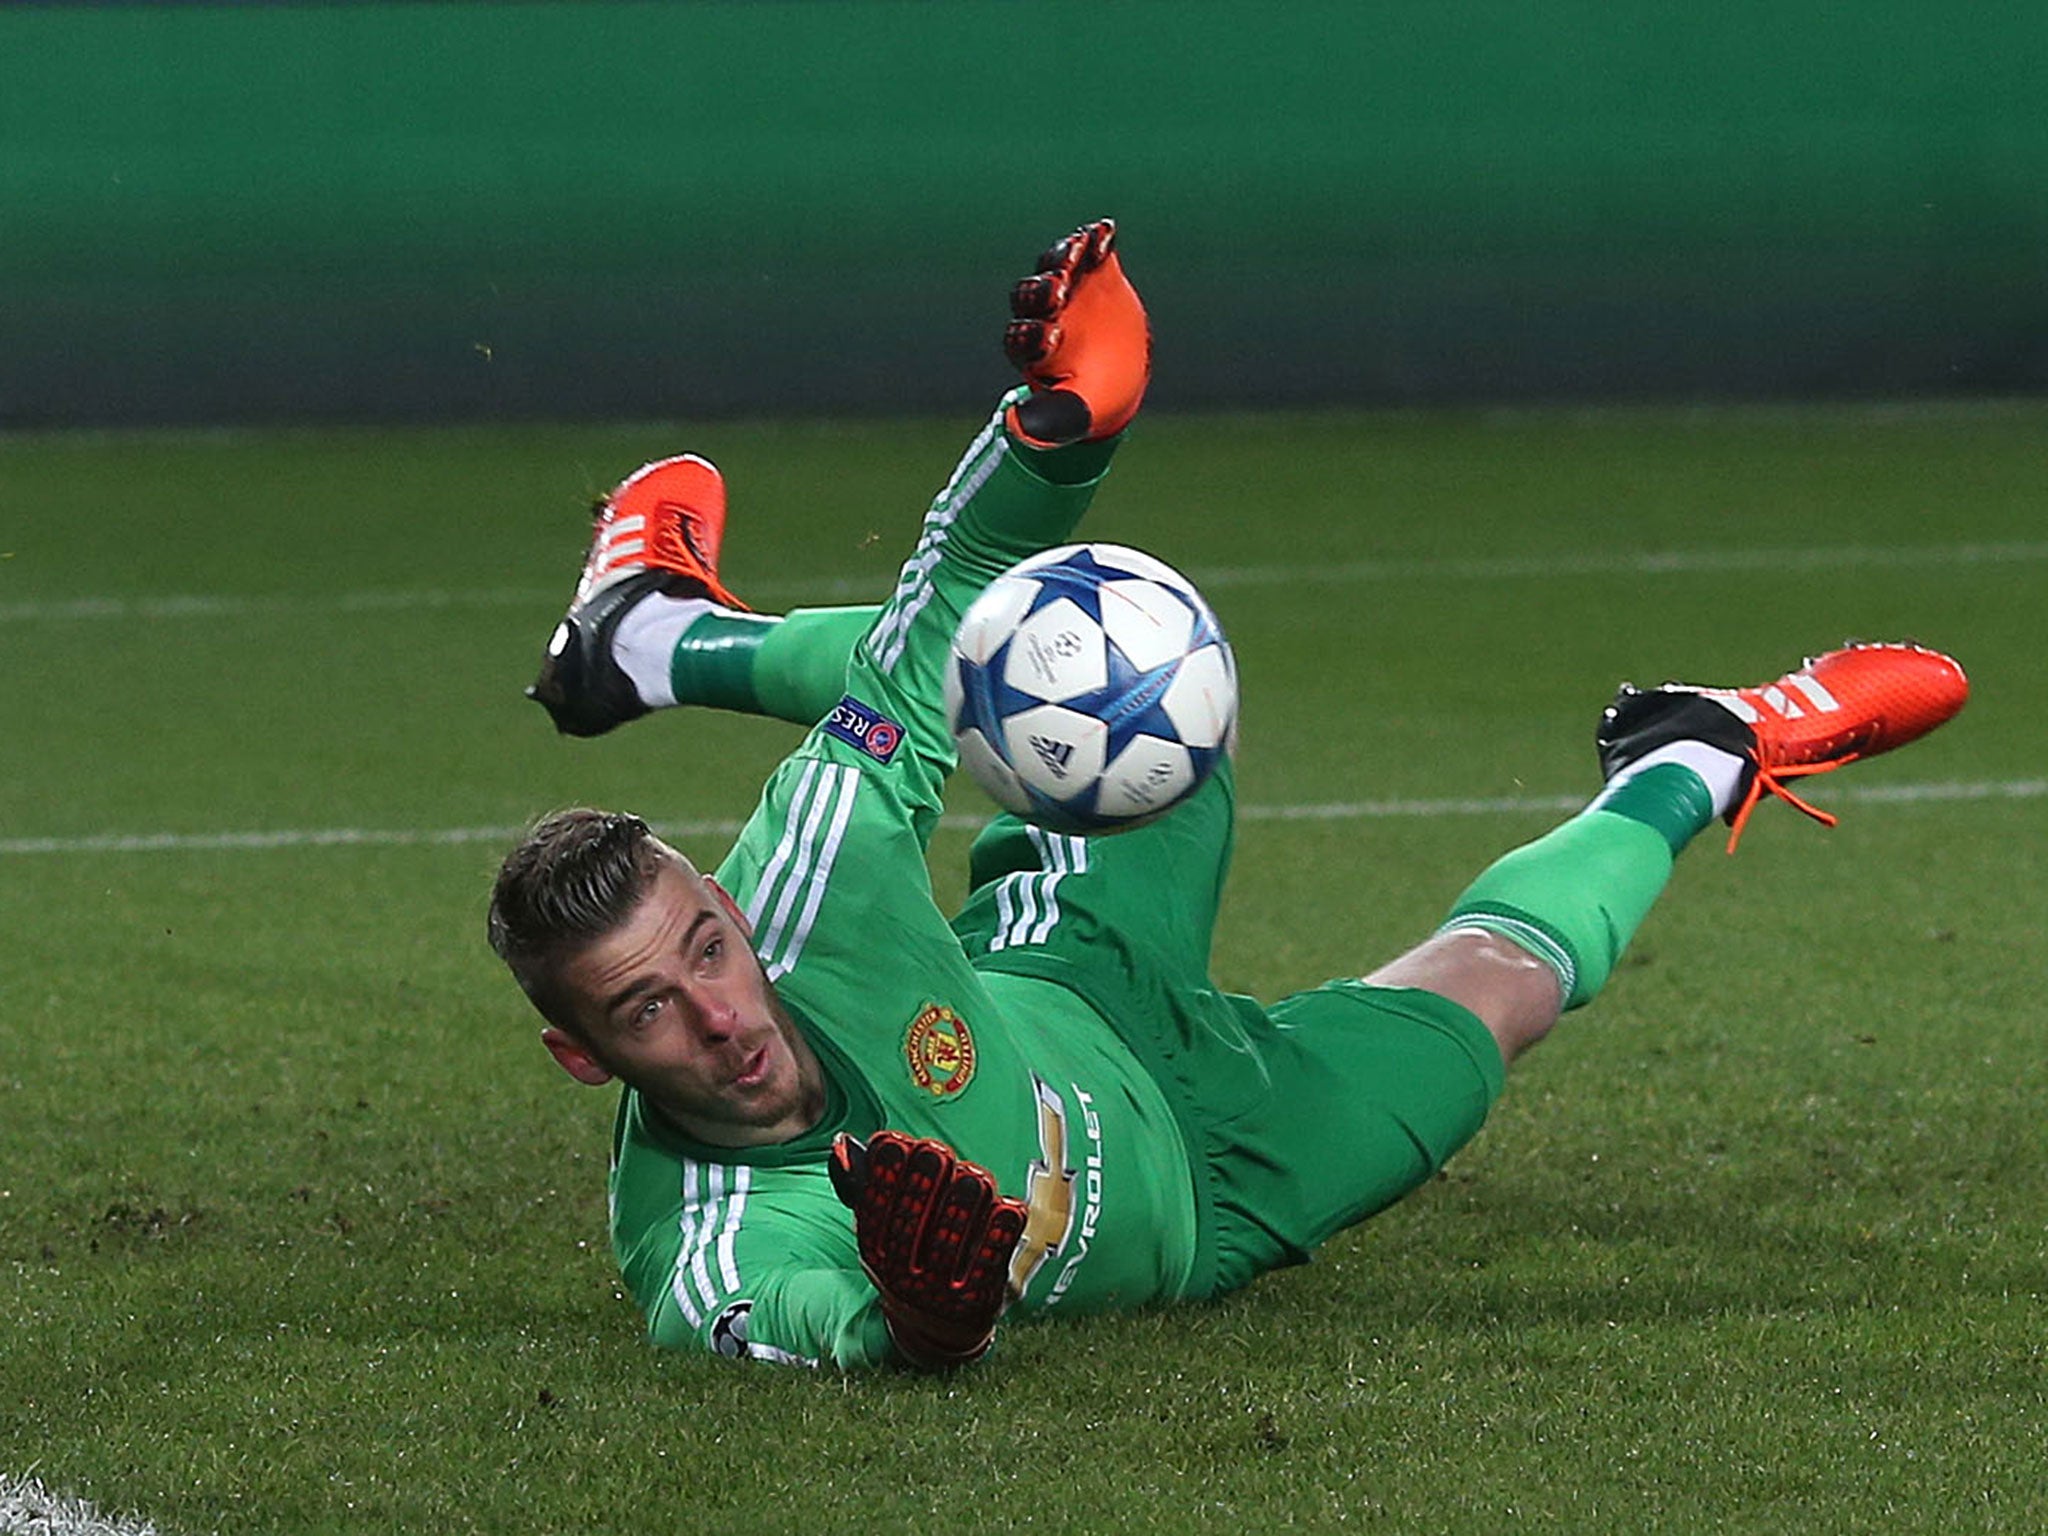 Manchester United goalkeeper David De Gea could be targeted by Real Madrid again in the summer